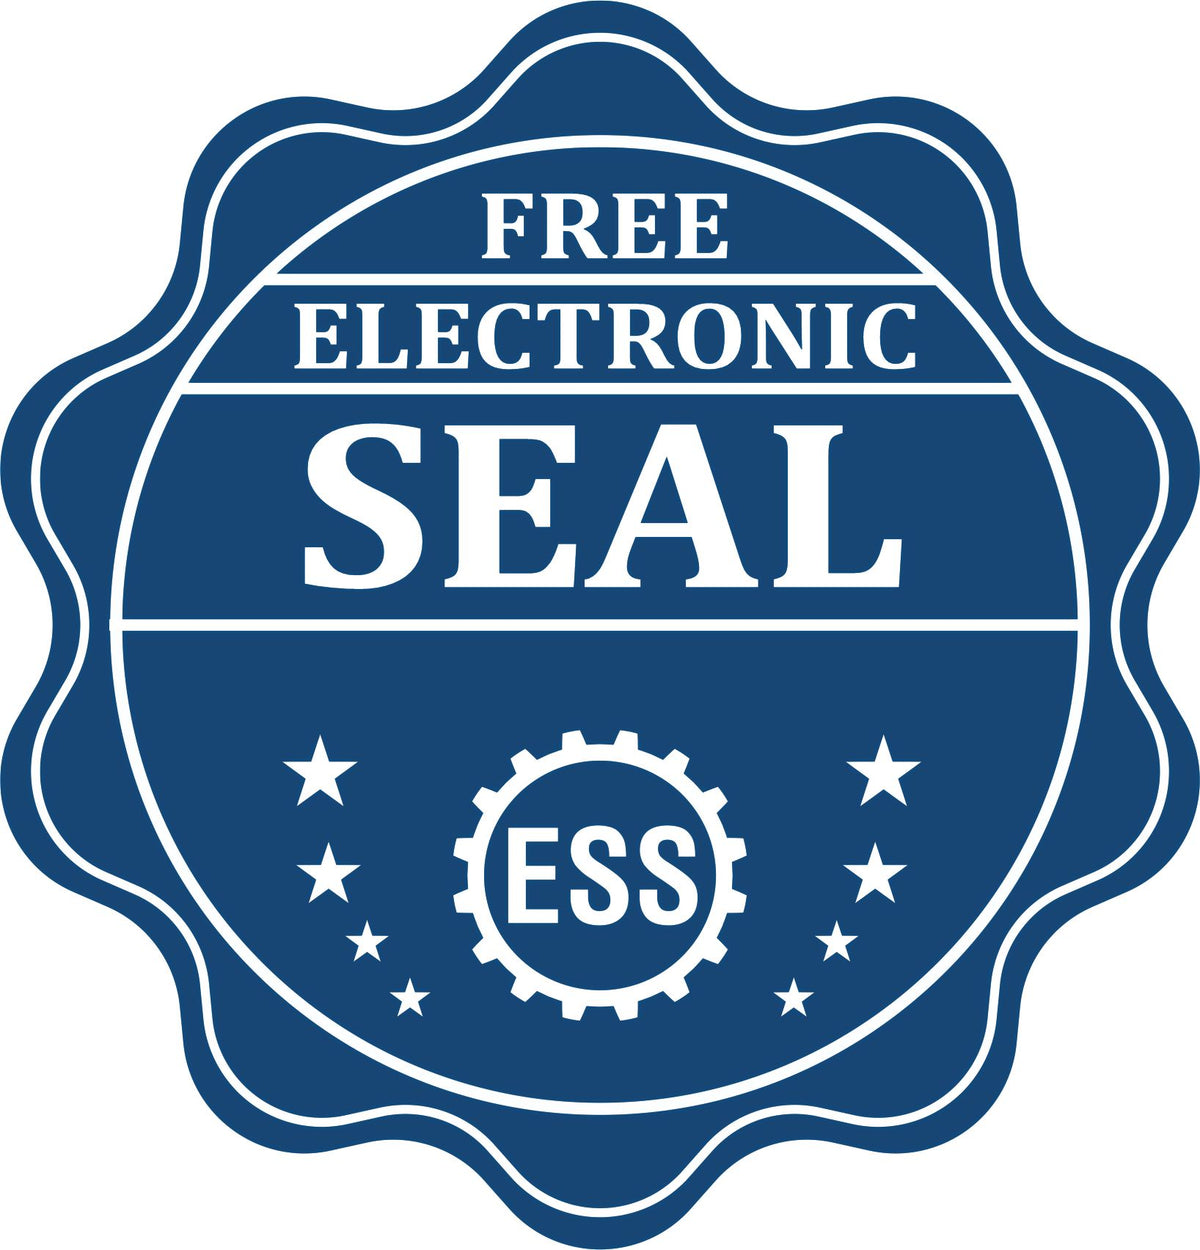 A badge showing a free electronic seal for the Gift Tennessee Architect Seal with stars and the ESS gear on the emblem.